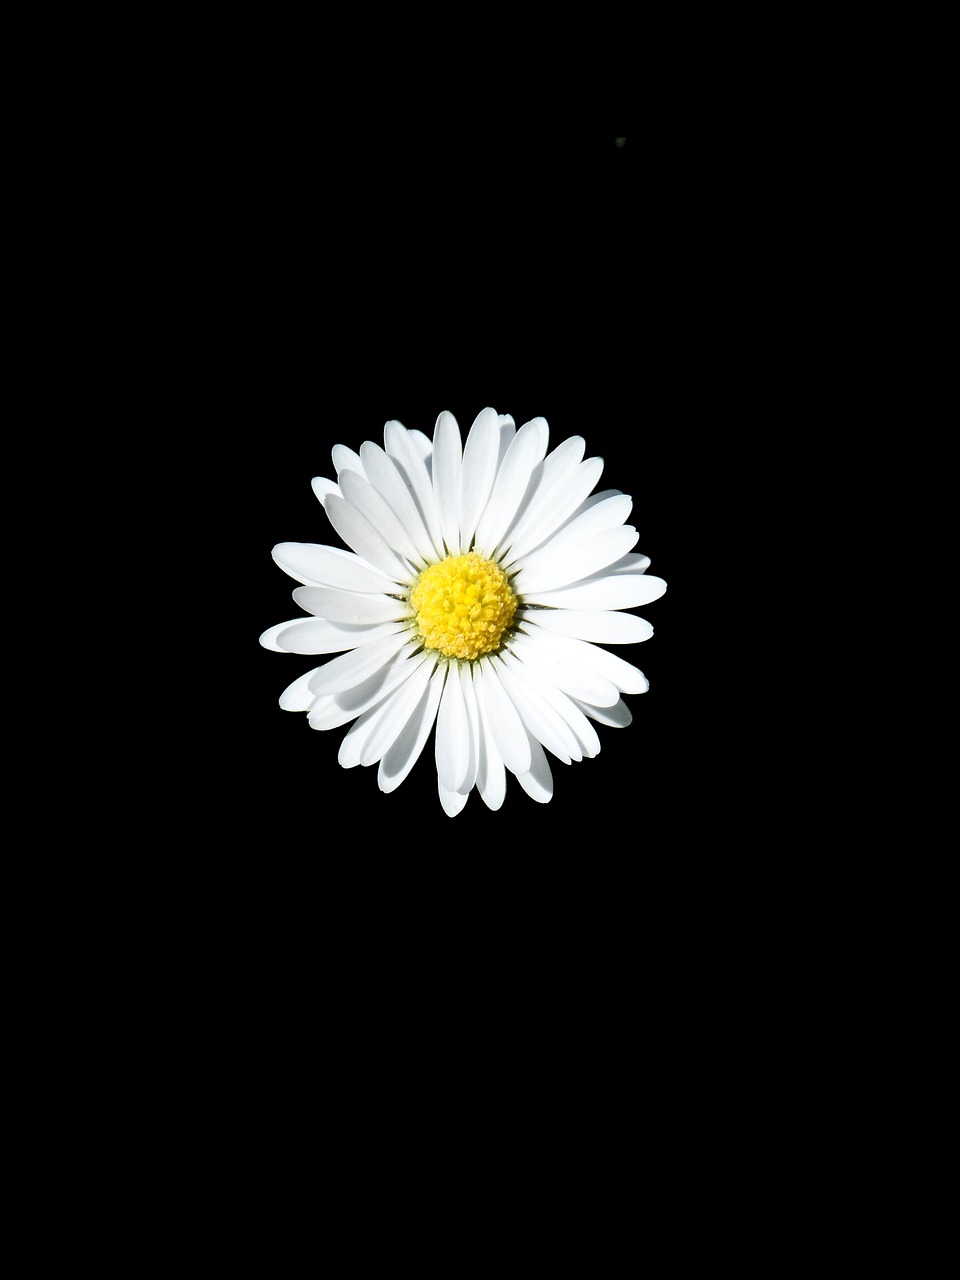 daisy white pointed flower free photo